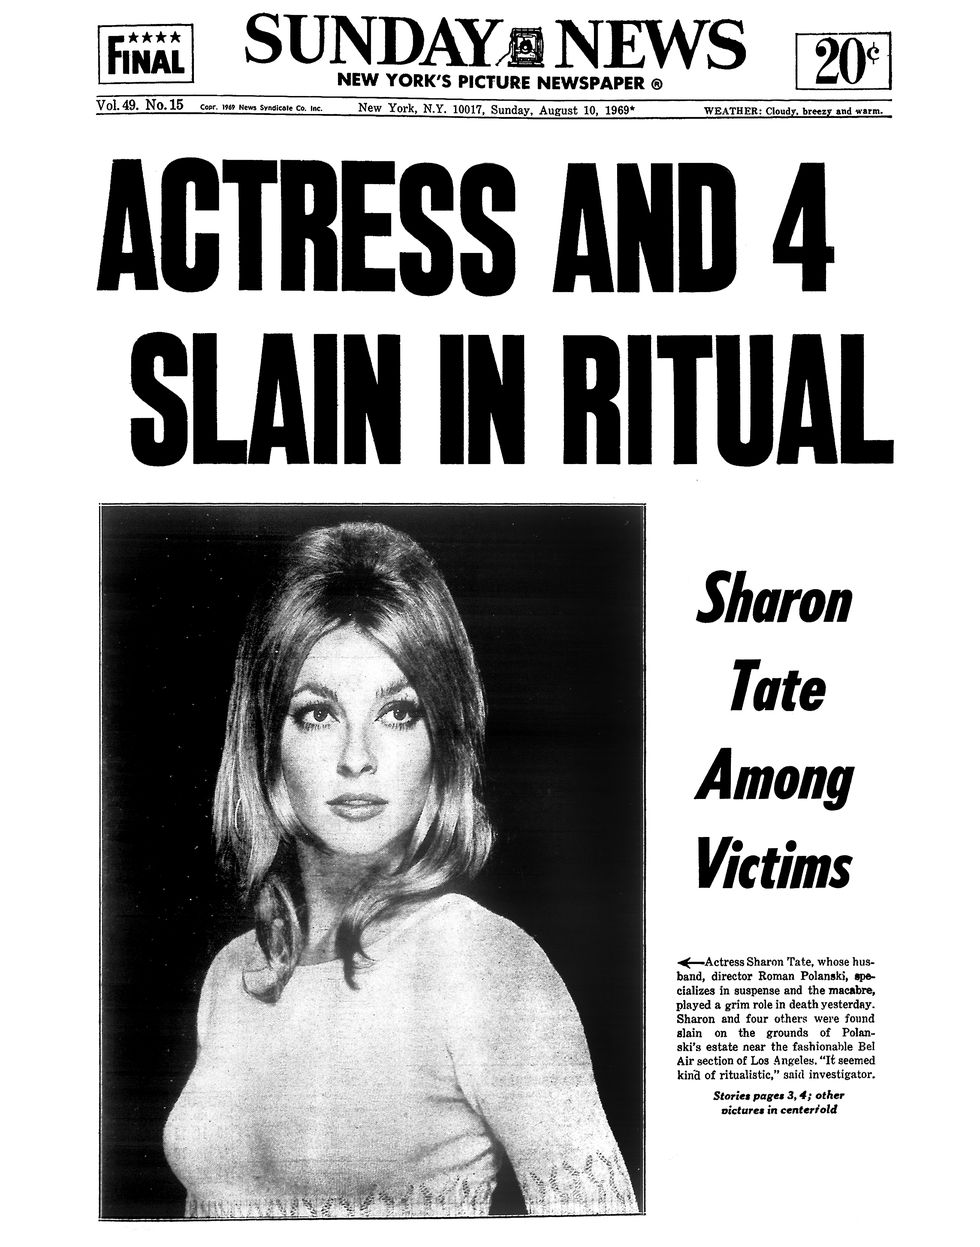 Daily News Front Page - Sharon Tate